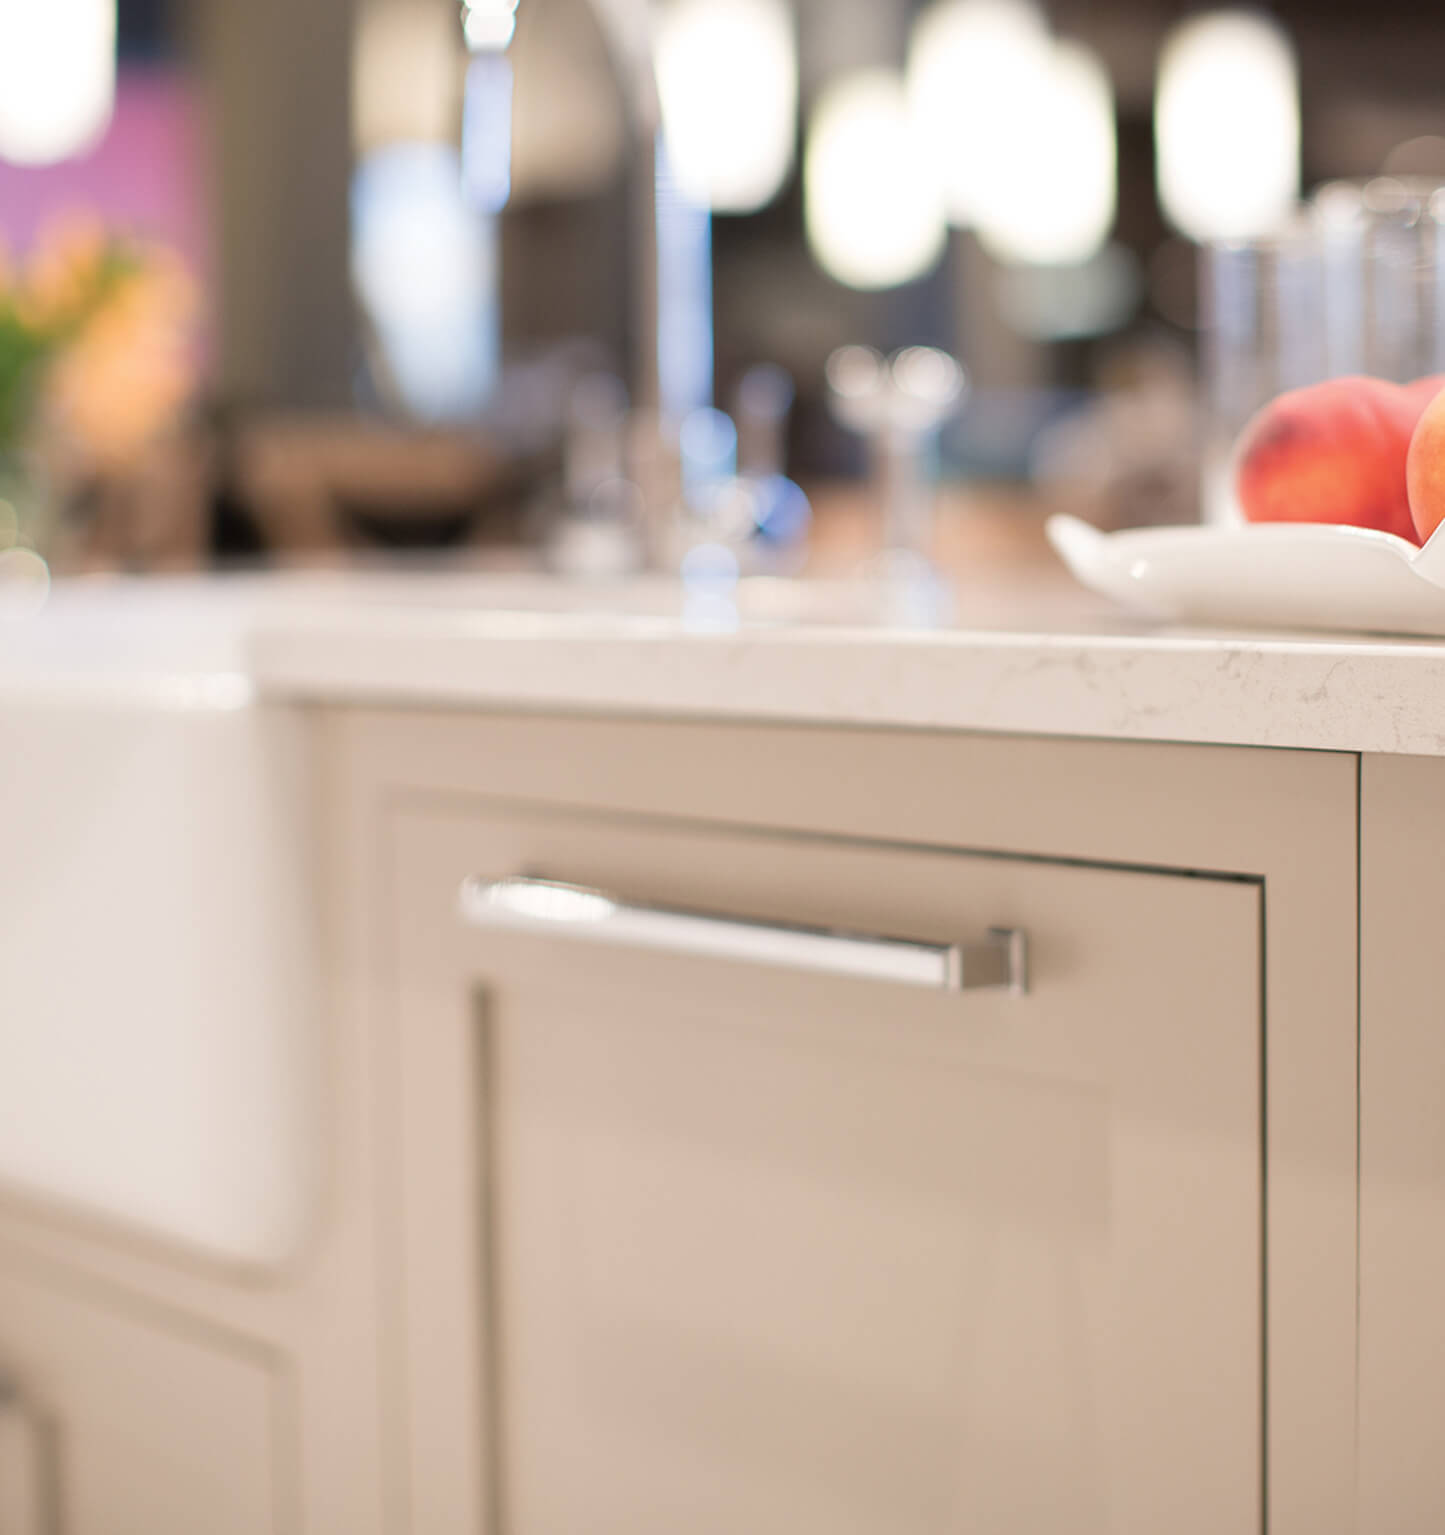 A dishwasher is hidden with a Dura Supreme cabinet appliance panel from Dura Supreme Cabinetry.